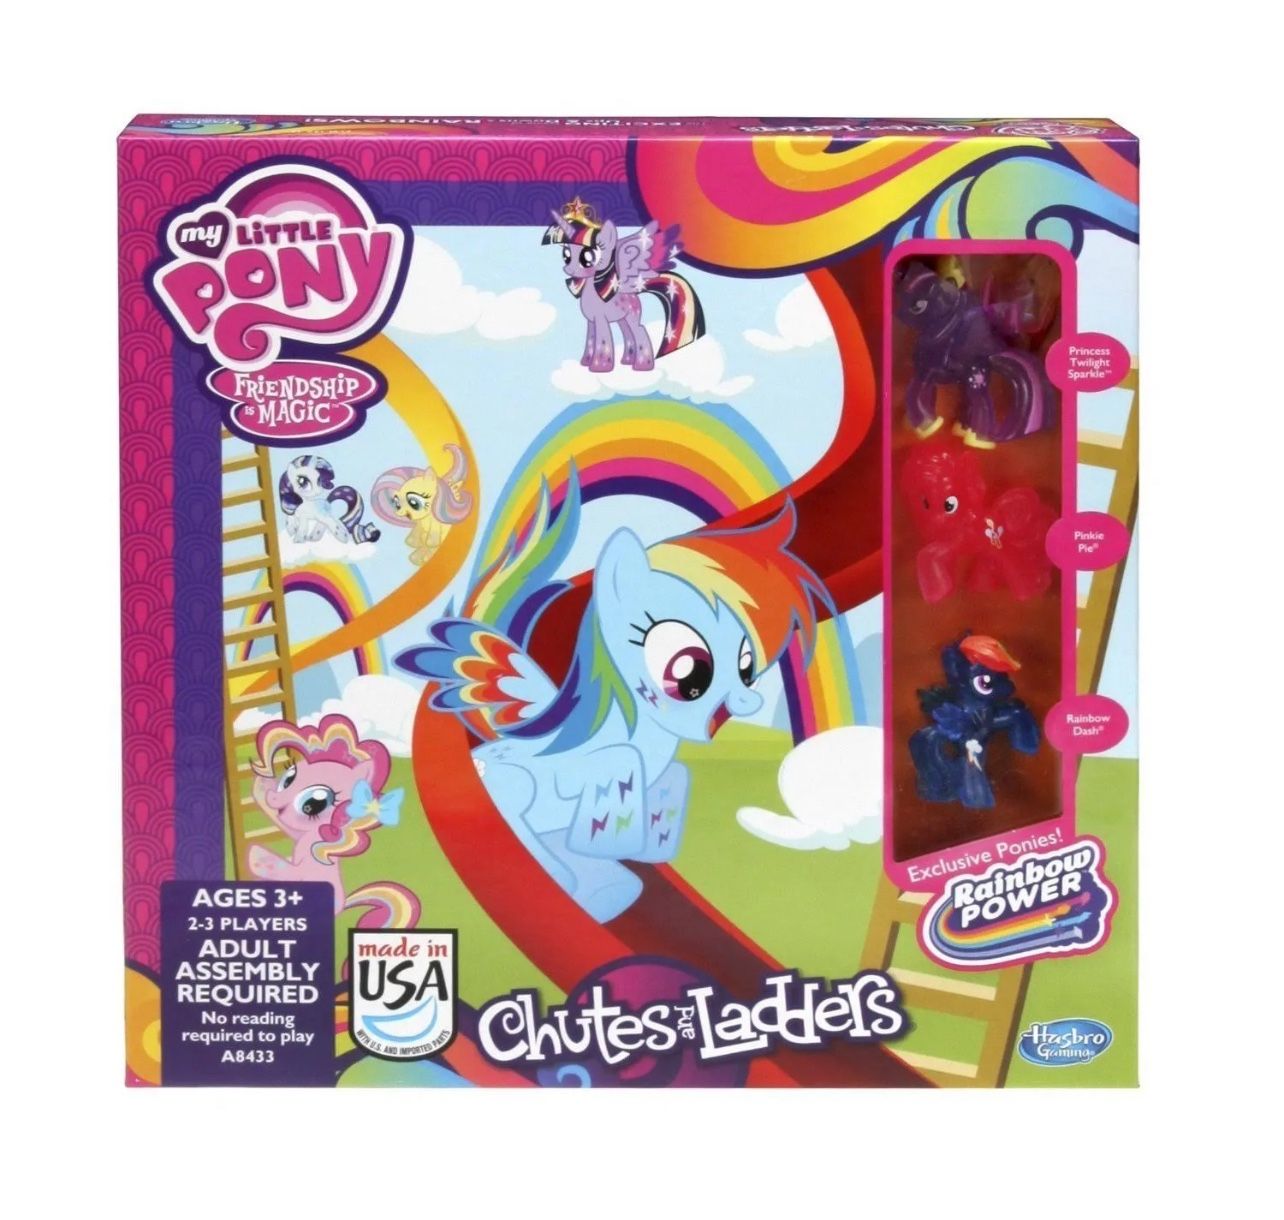 MY LITTLE PONY FRIENDSHIP IS MAGIC CHUTES & LADDERS BOARD GAME COMPLETE! 2014 EXCLUSIVE PONIES